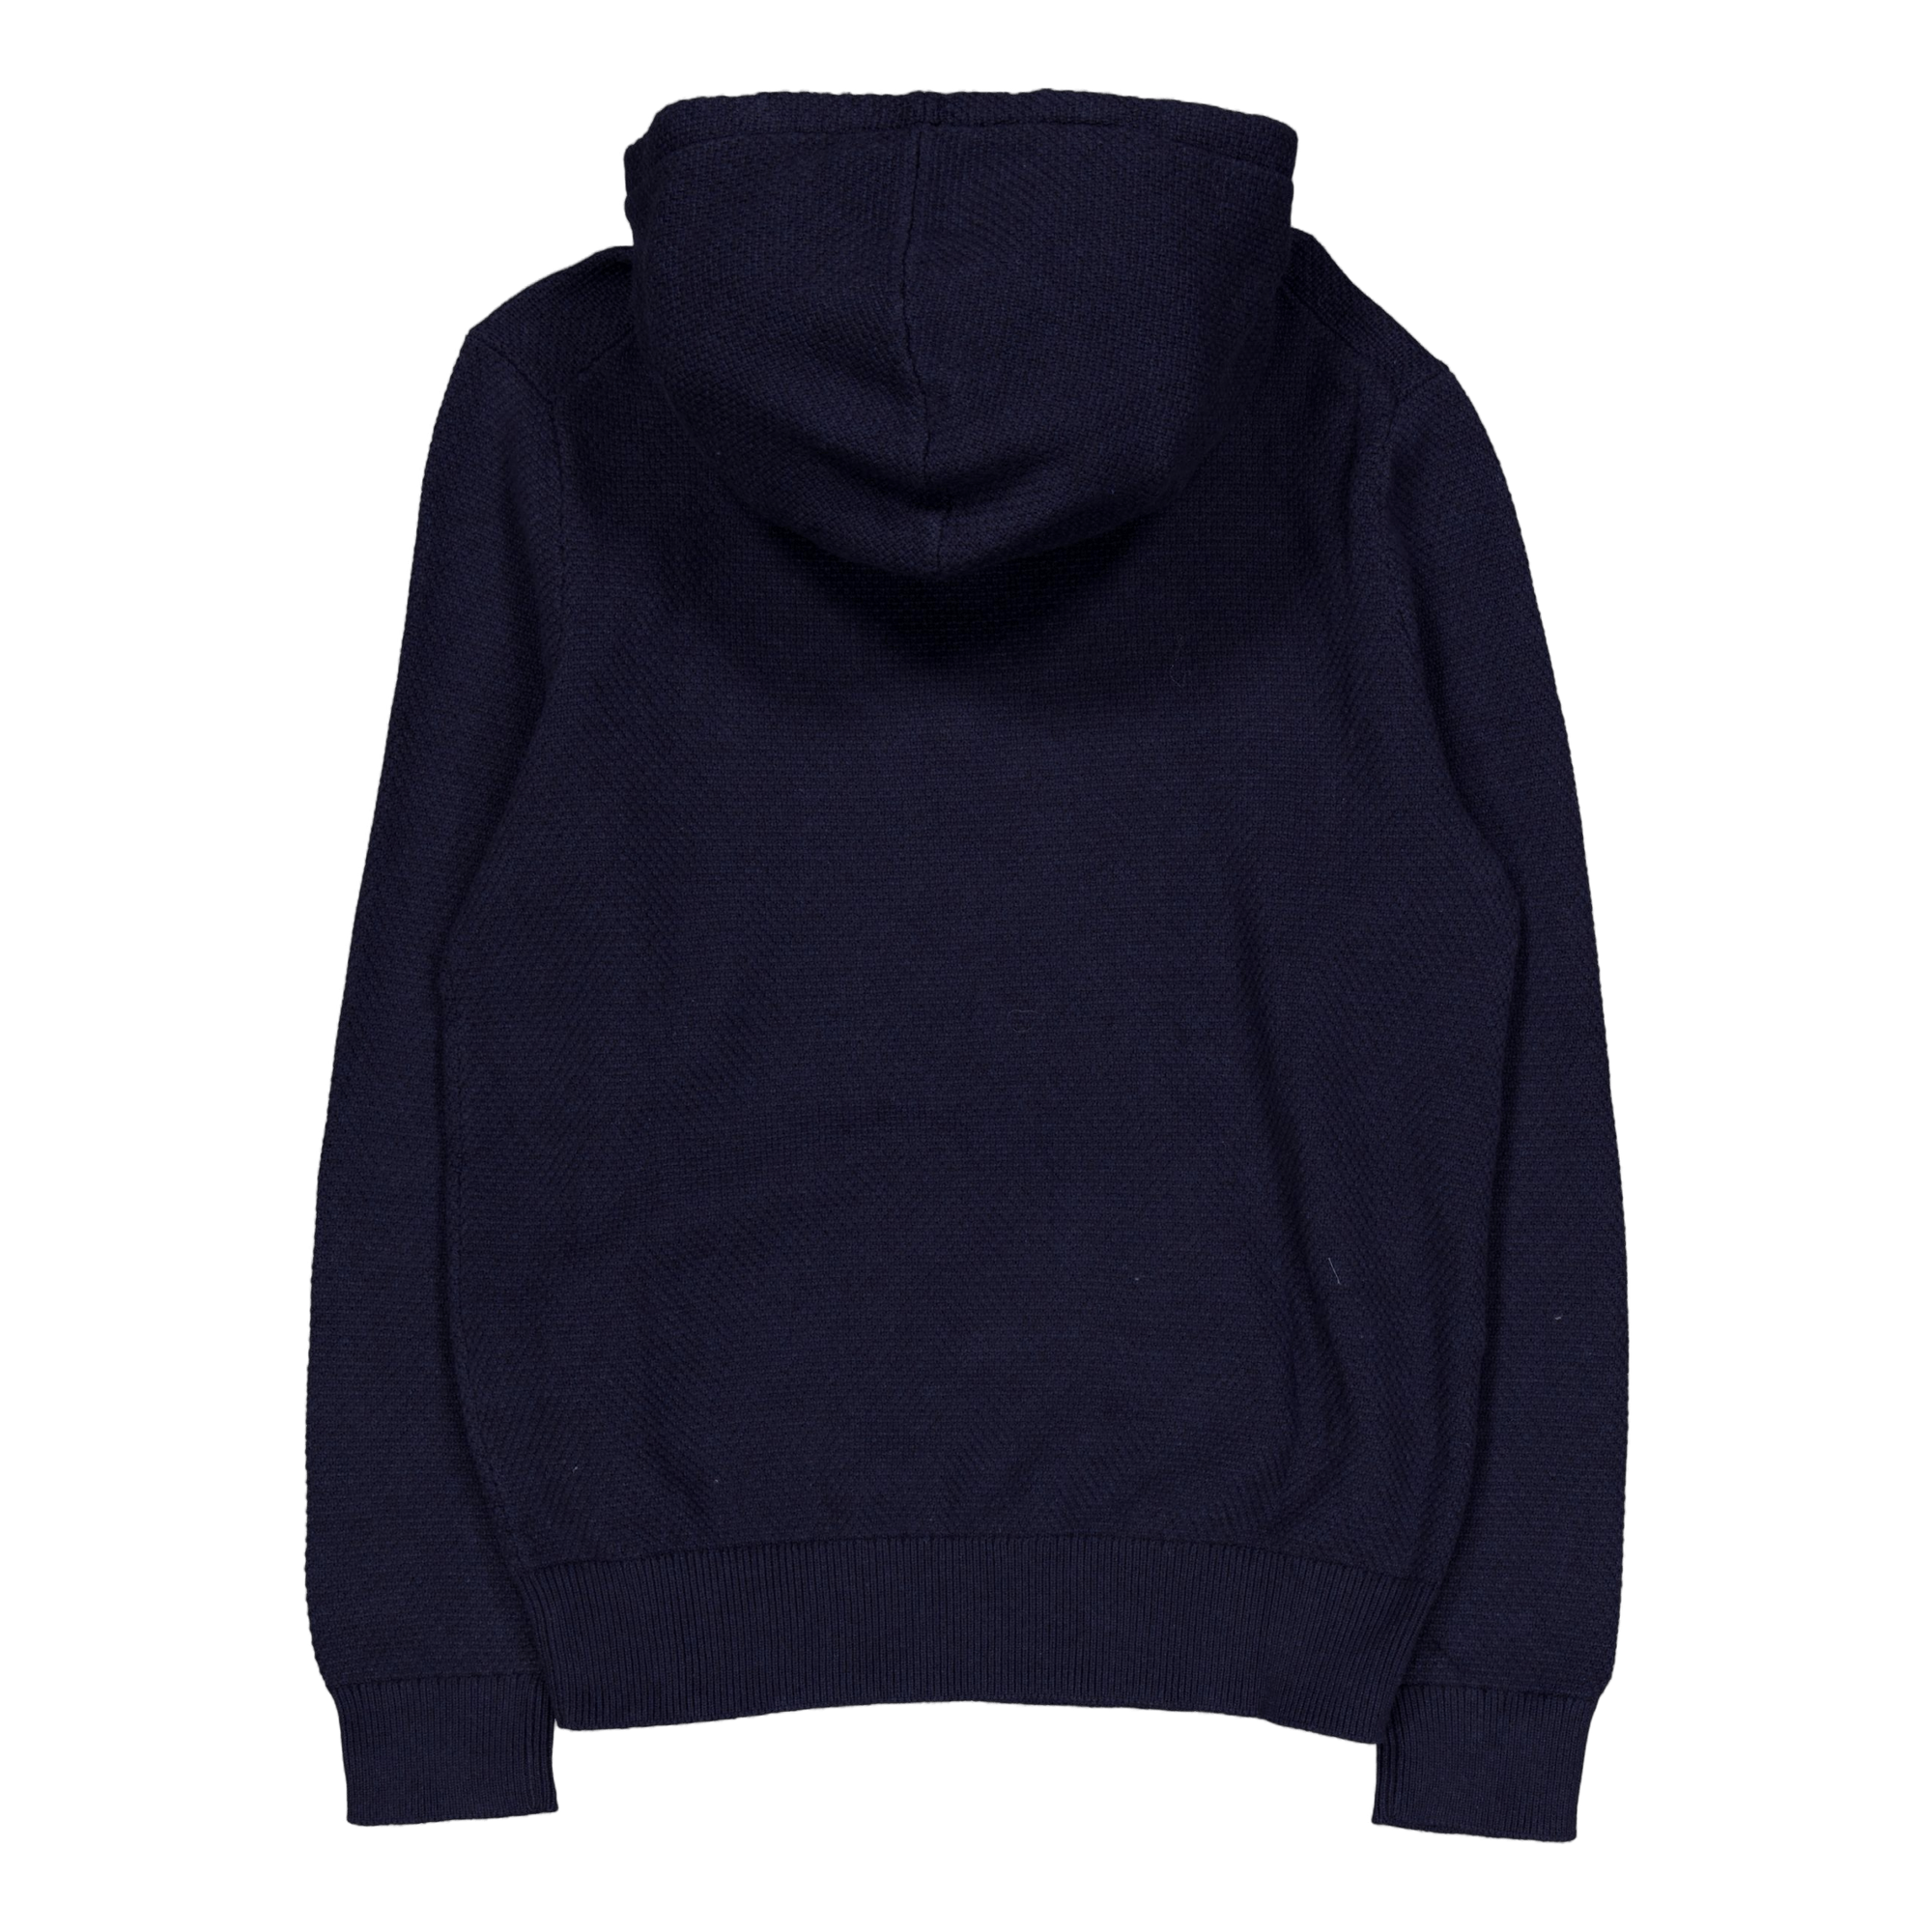 Woven-Stitch Cotton Hooded Sweater Navy Hthr